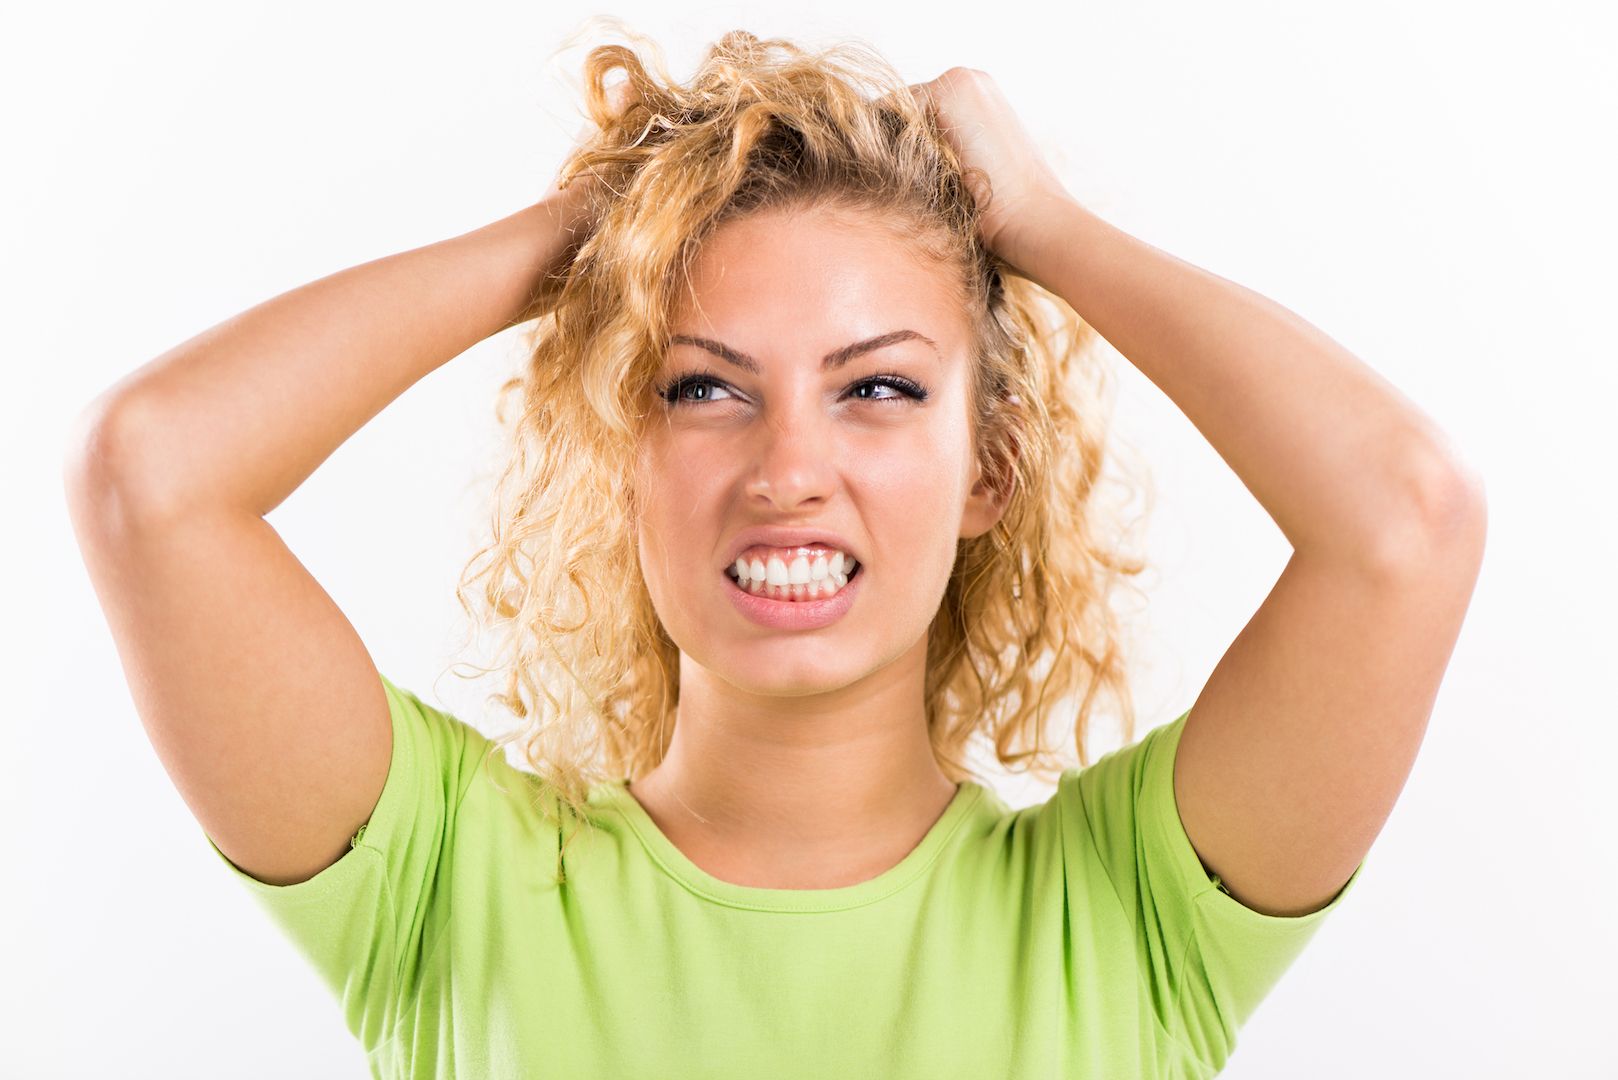 A blond woman grimmasing, pulling her hair due to stress